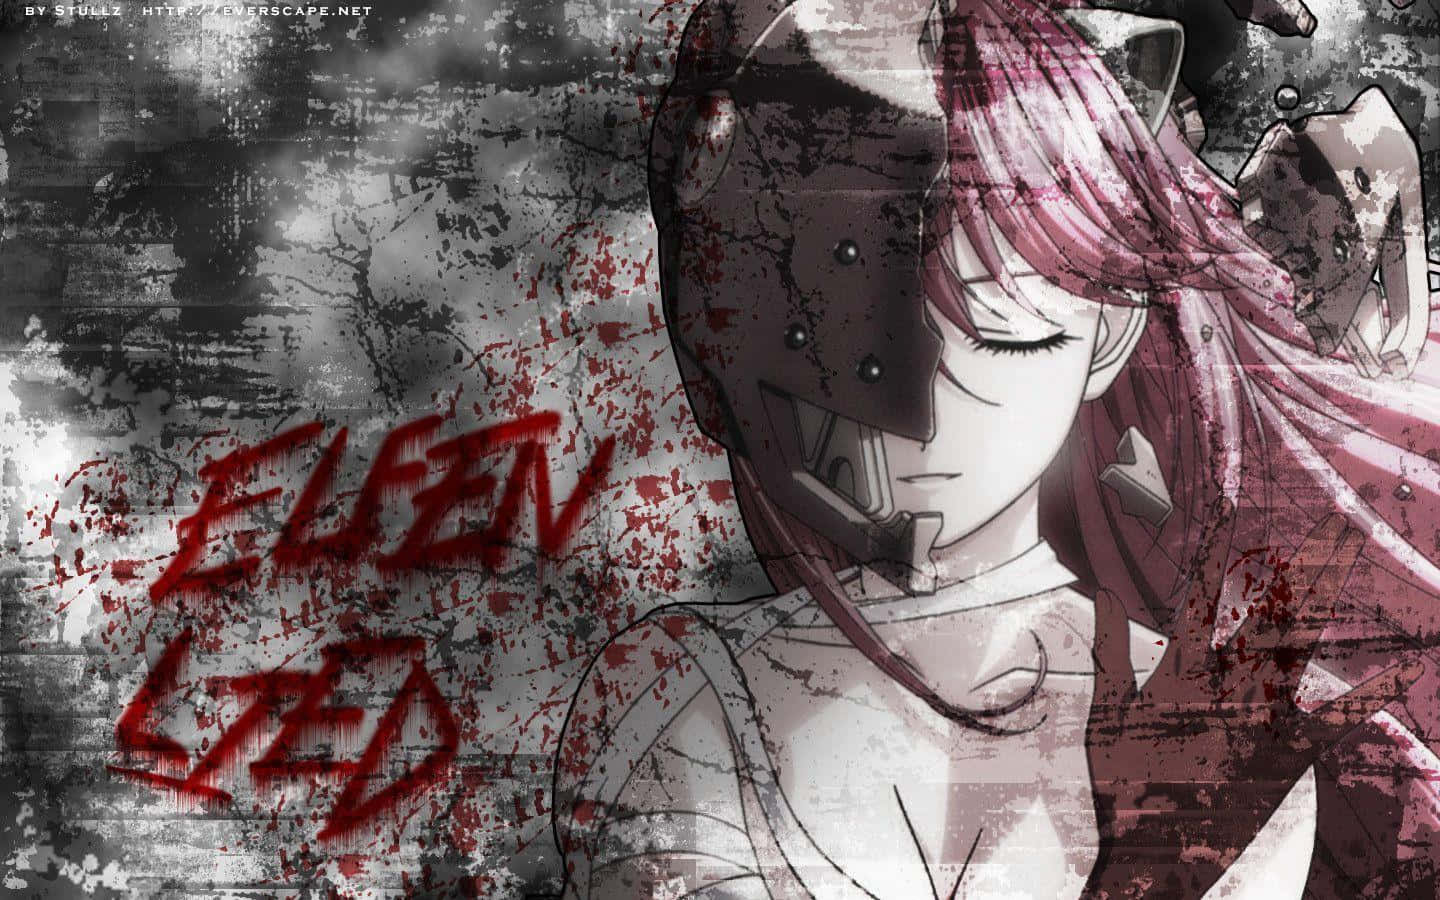 "Luce and Nyu reunite for a moment of bliss under a setting sun in Elfen Lied"